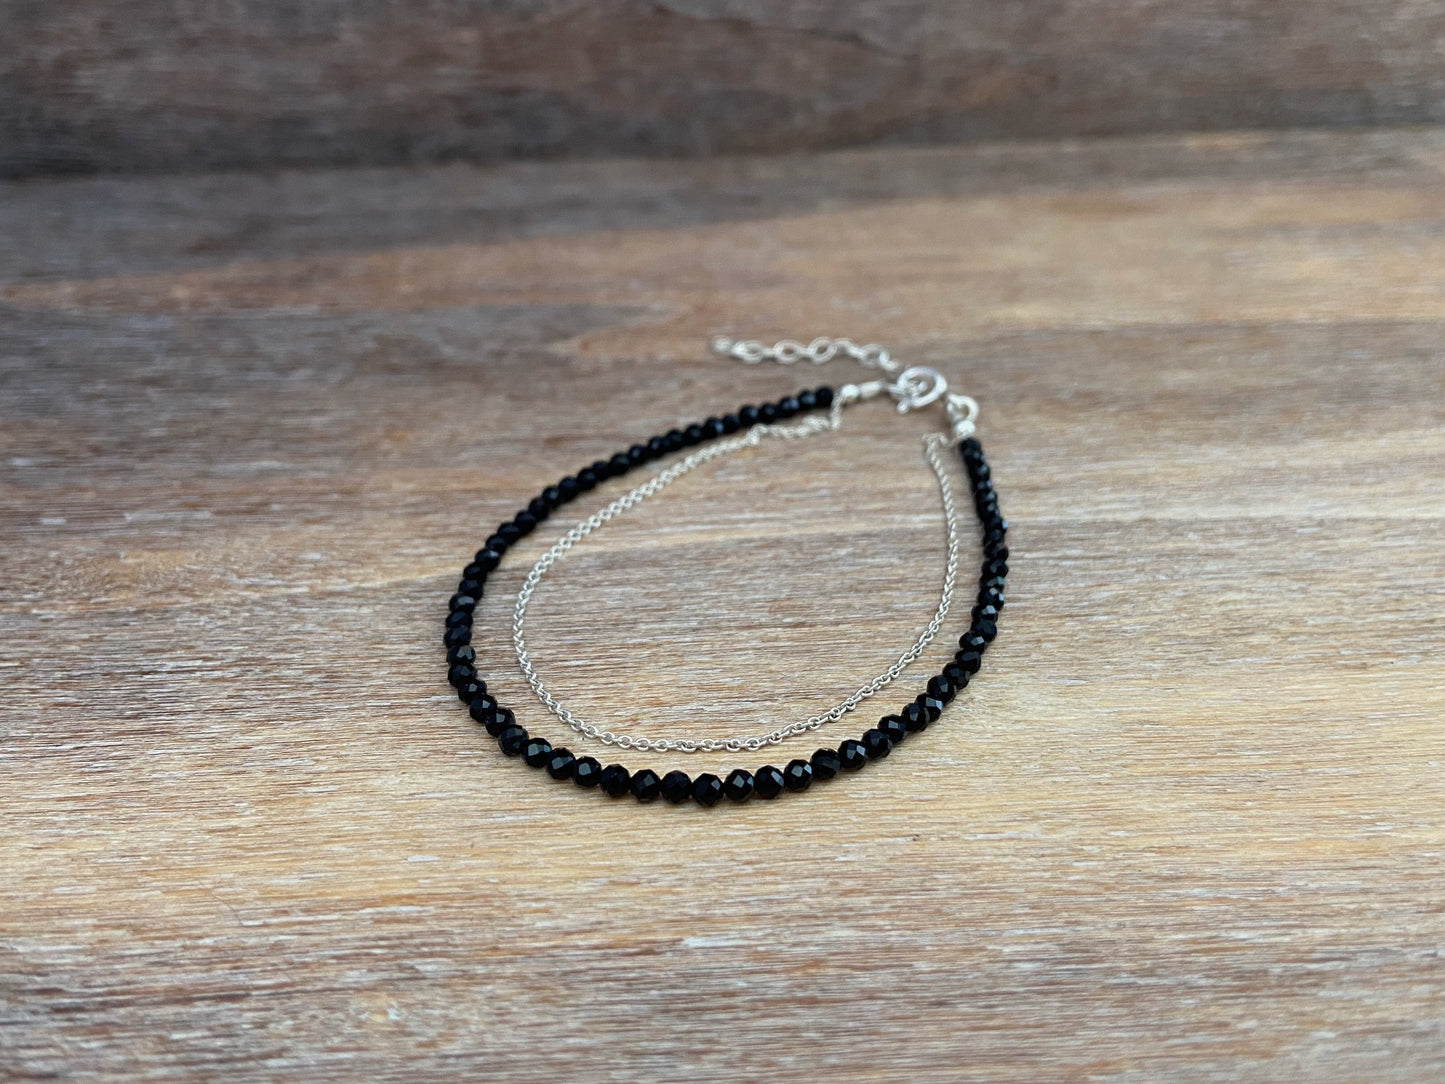 Bracelet with black spinel stones and silver chain 